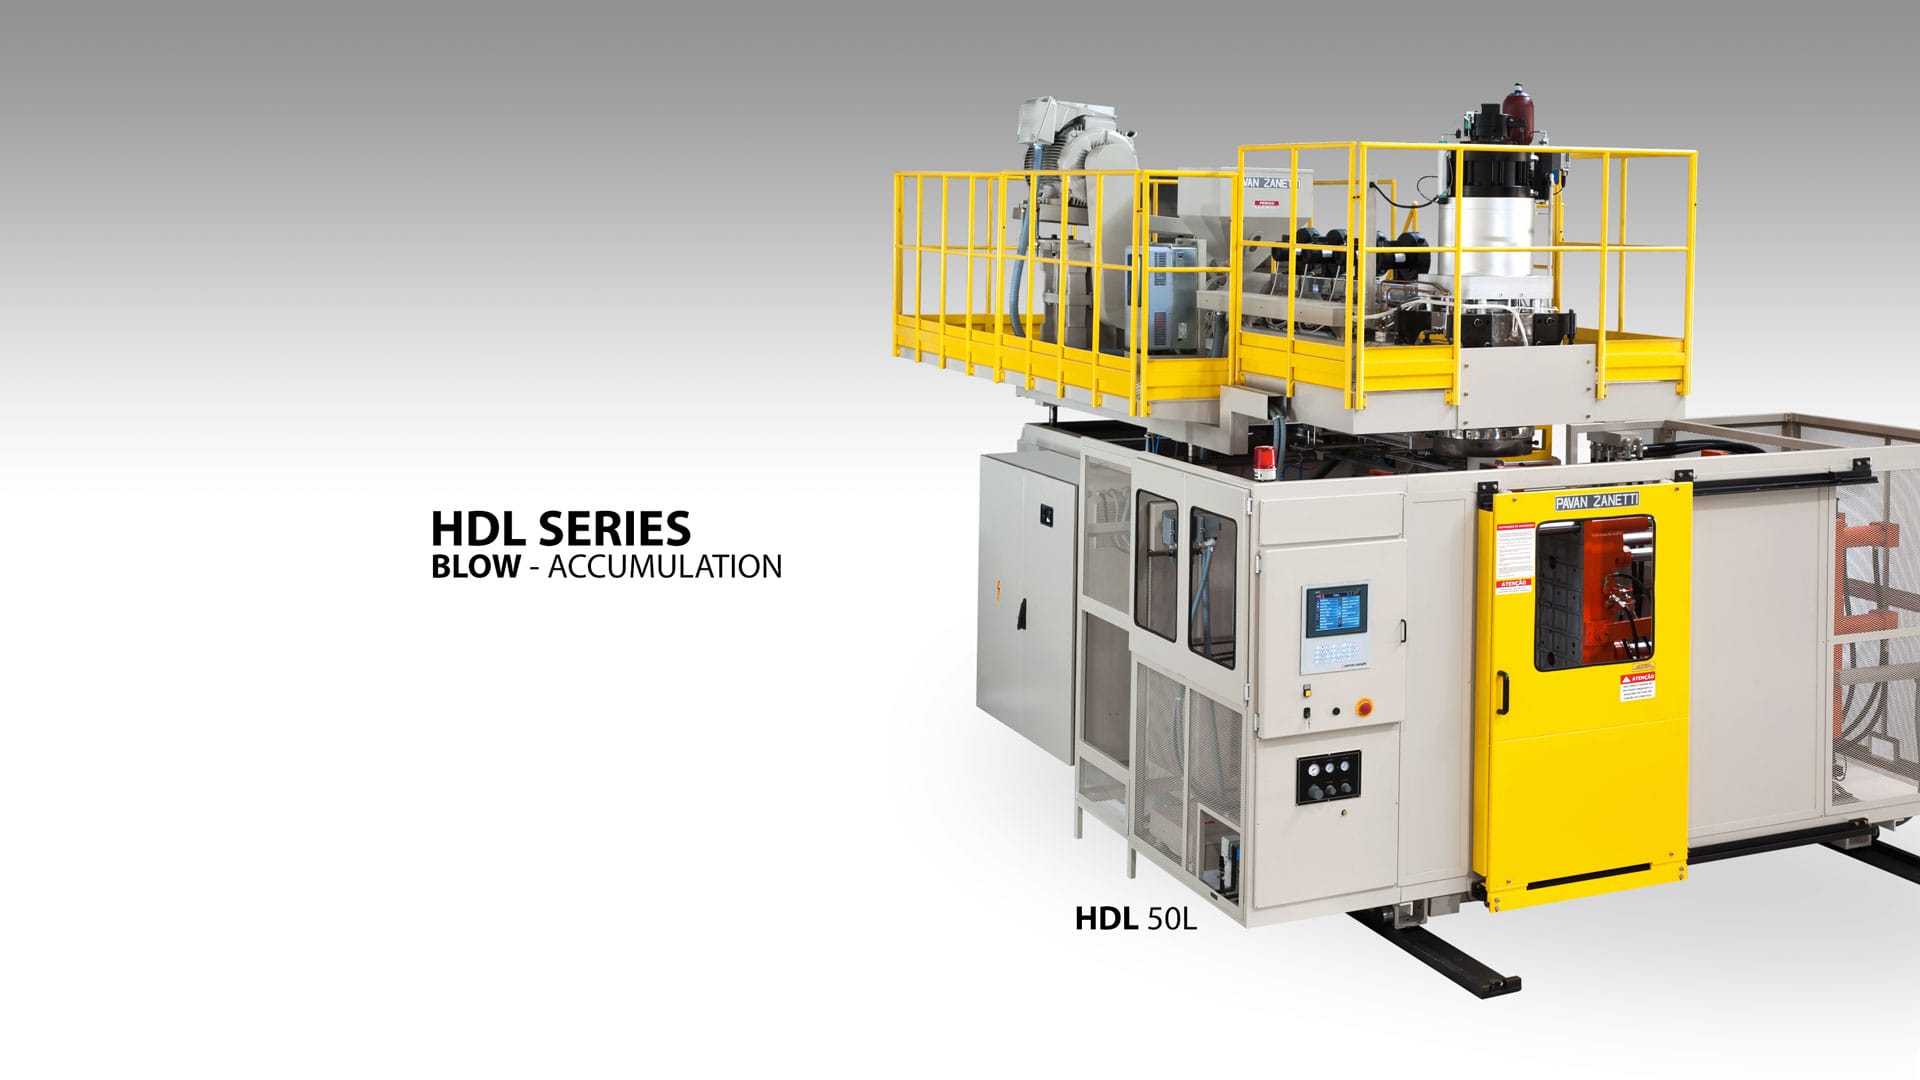 HDL Series Blow Accumulation